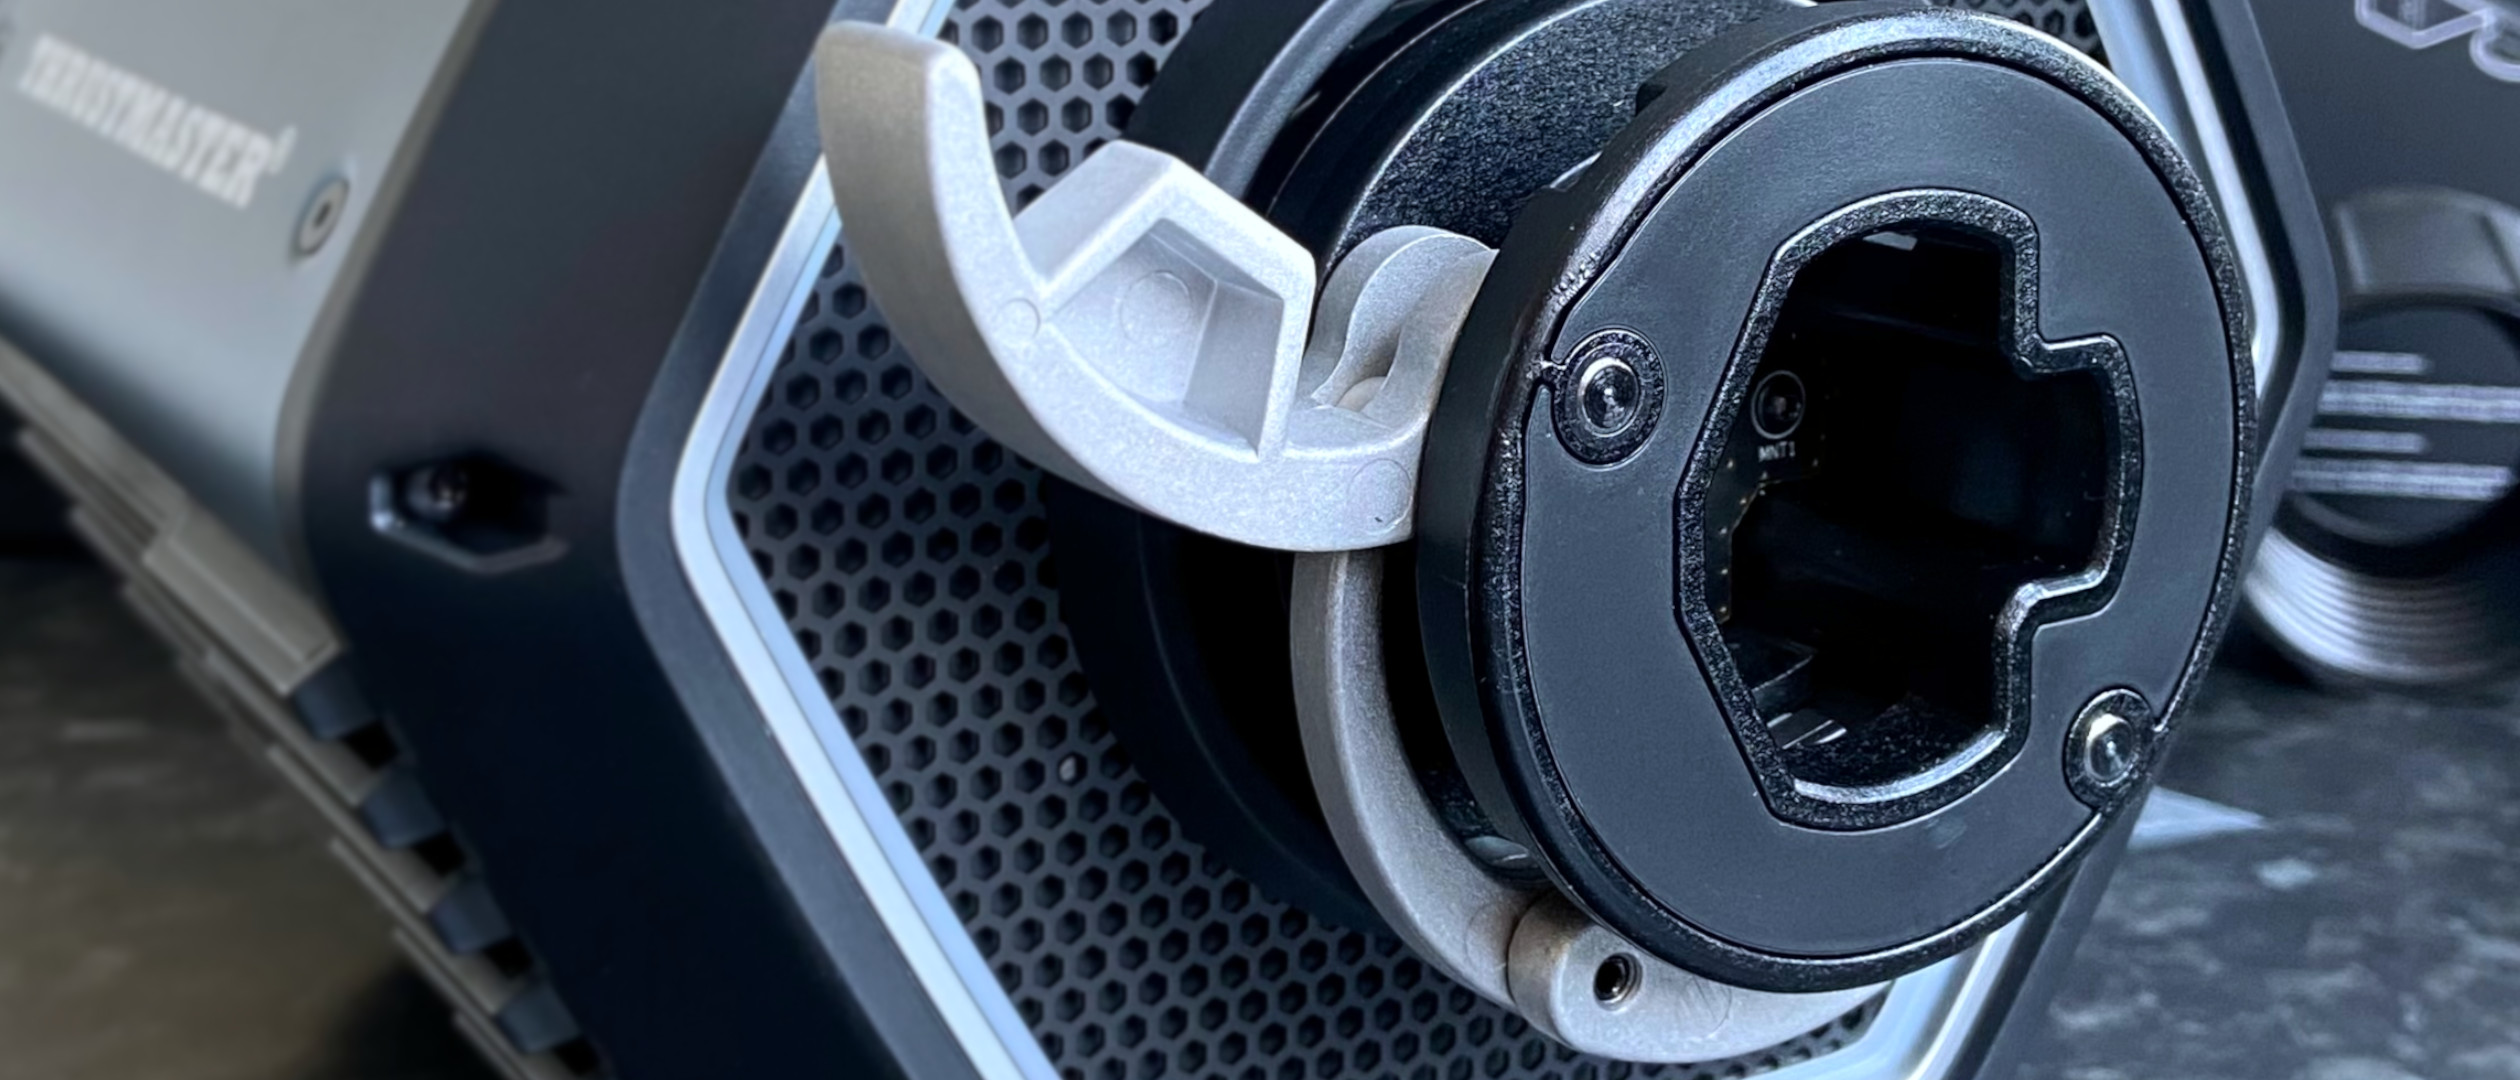 Thrustmaster T818 review: Affordable direct-drive sim racing with a catch